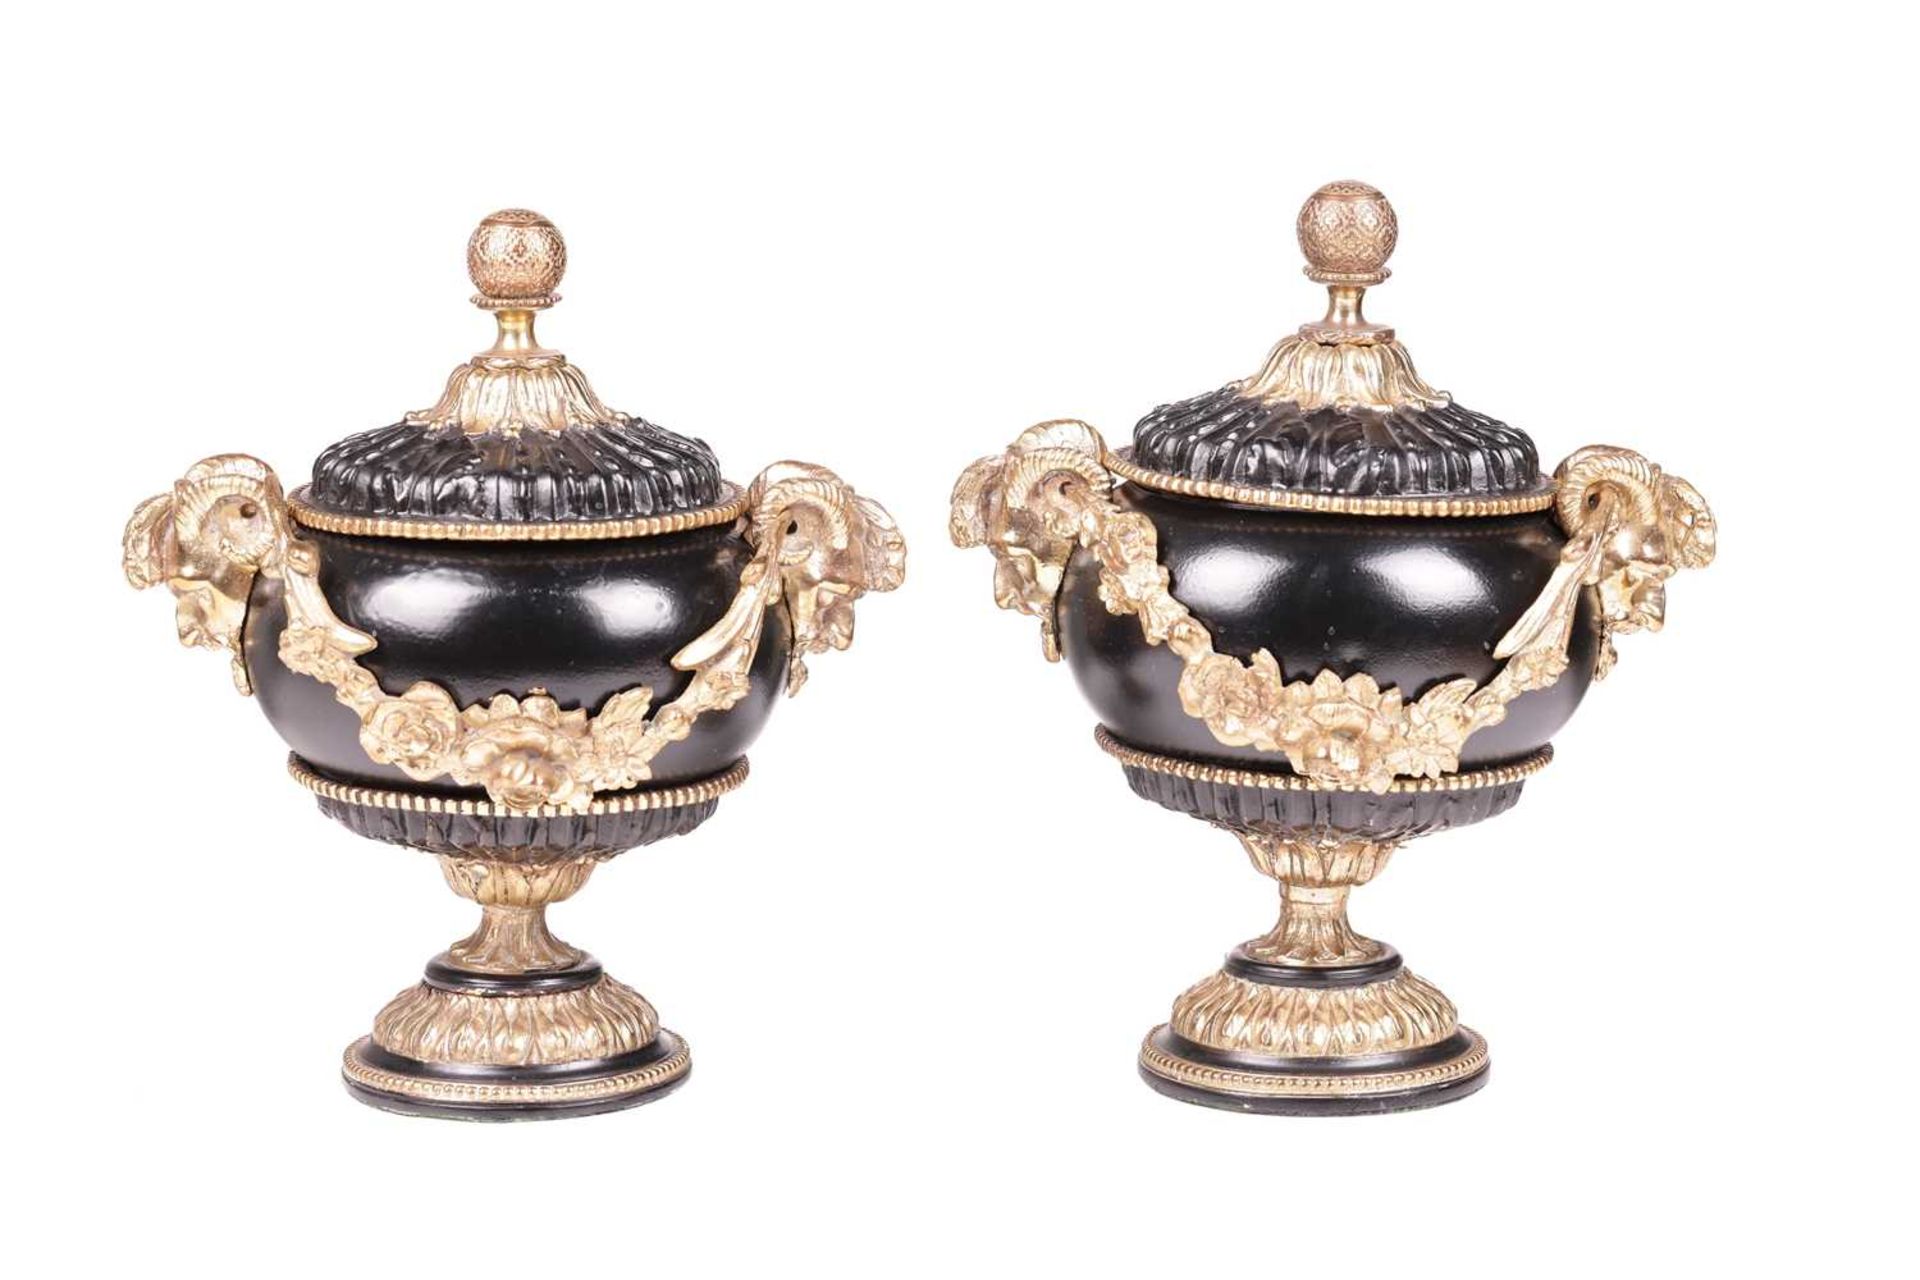 A pair of Neo-classical black lacquer urns and covers, with gilt bronze mounts, mask handles with fl